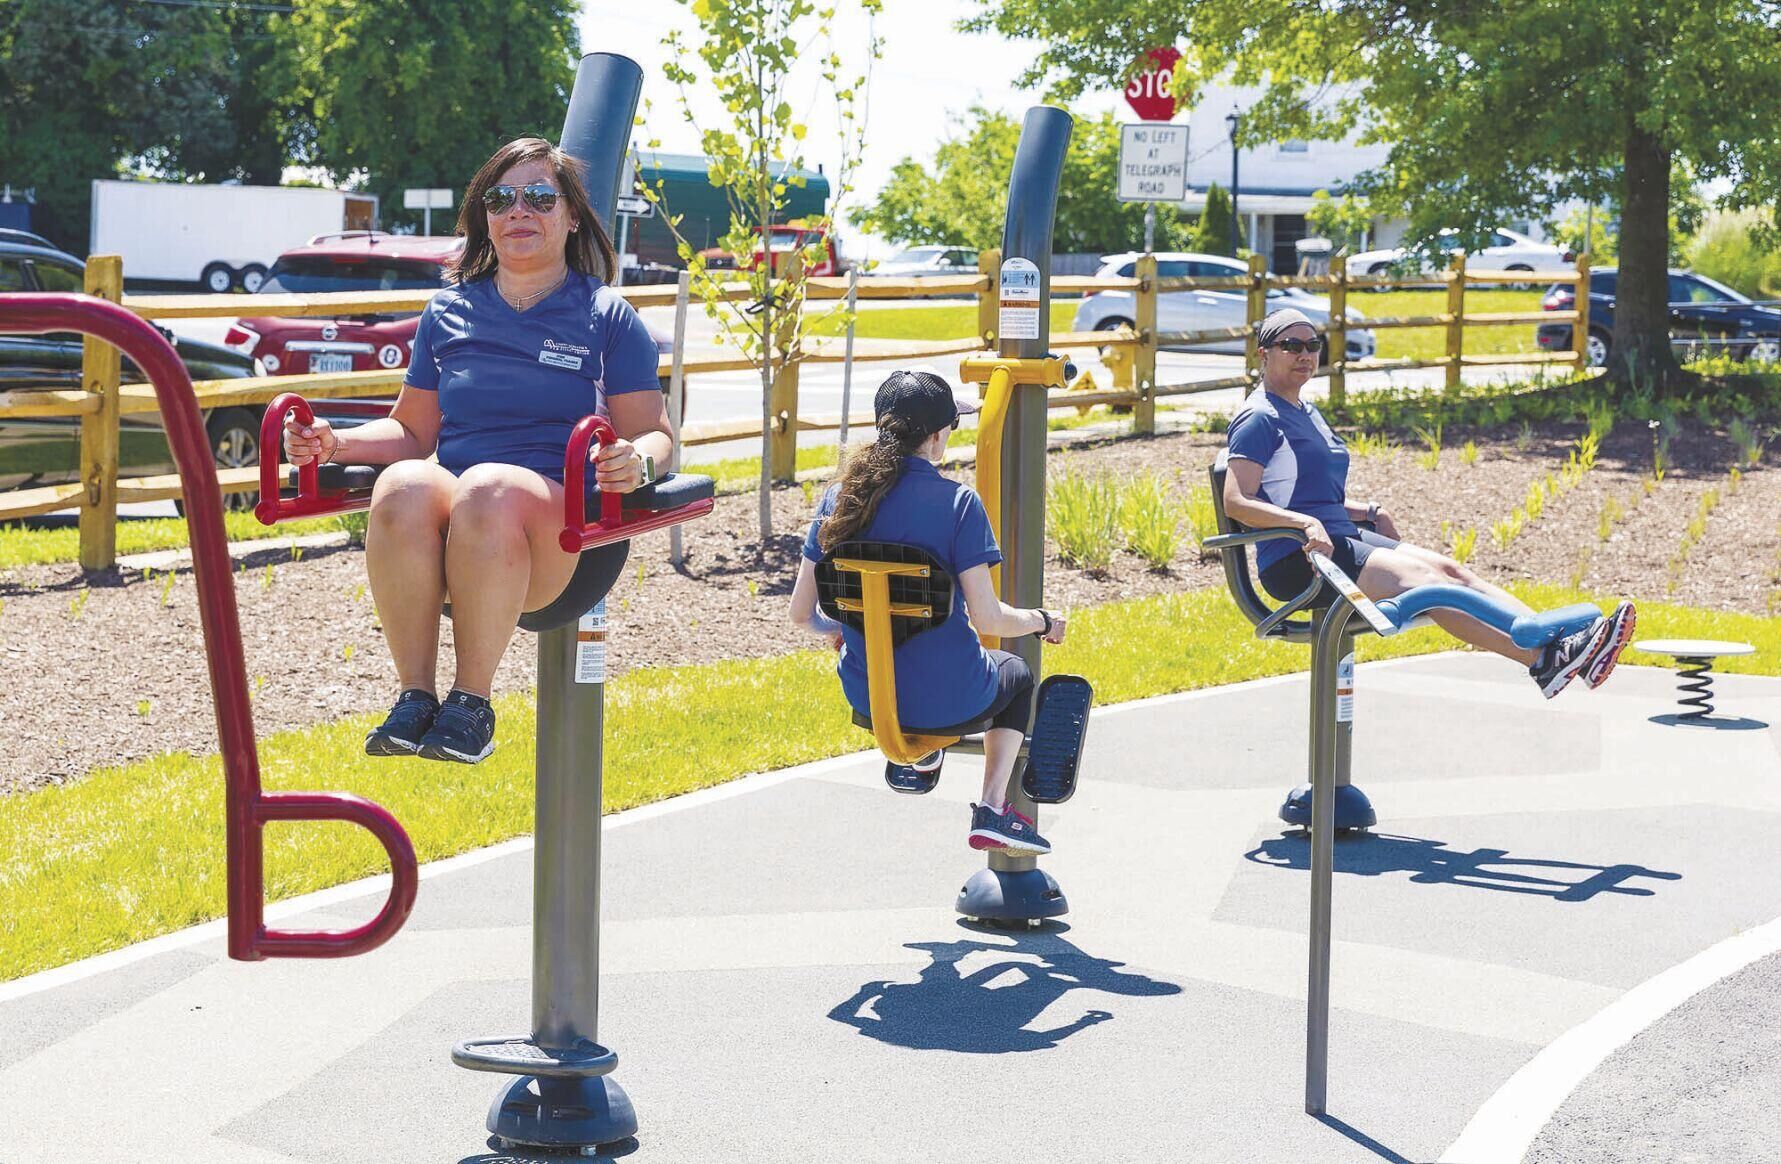 Members of Prince William County's fitness team try out some of the workout stations at the new park. (Paul Lara/Inside NOVA)